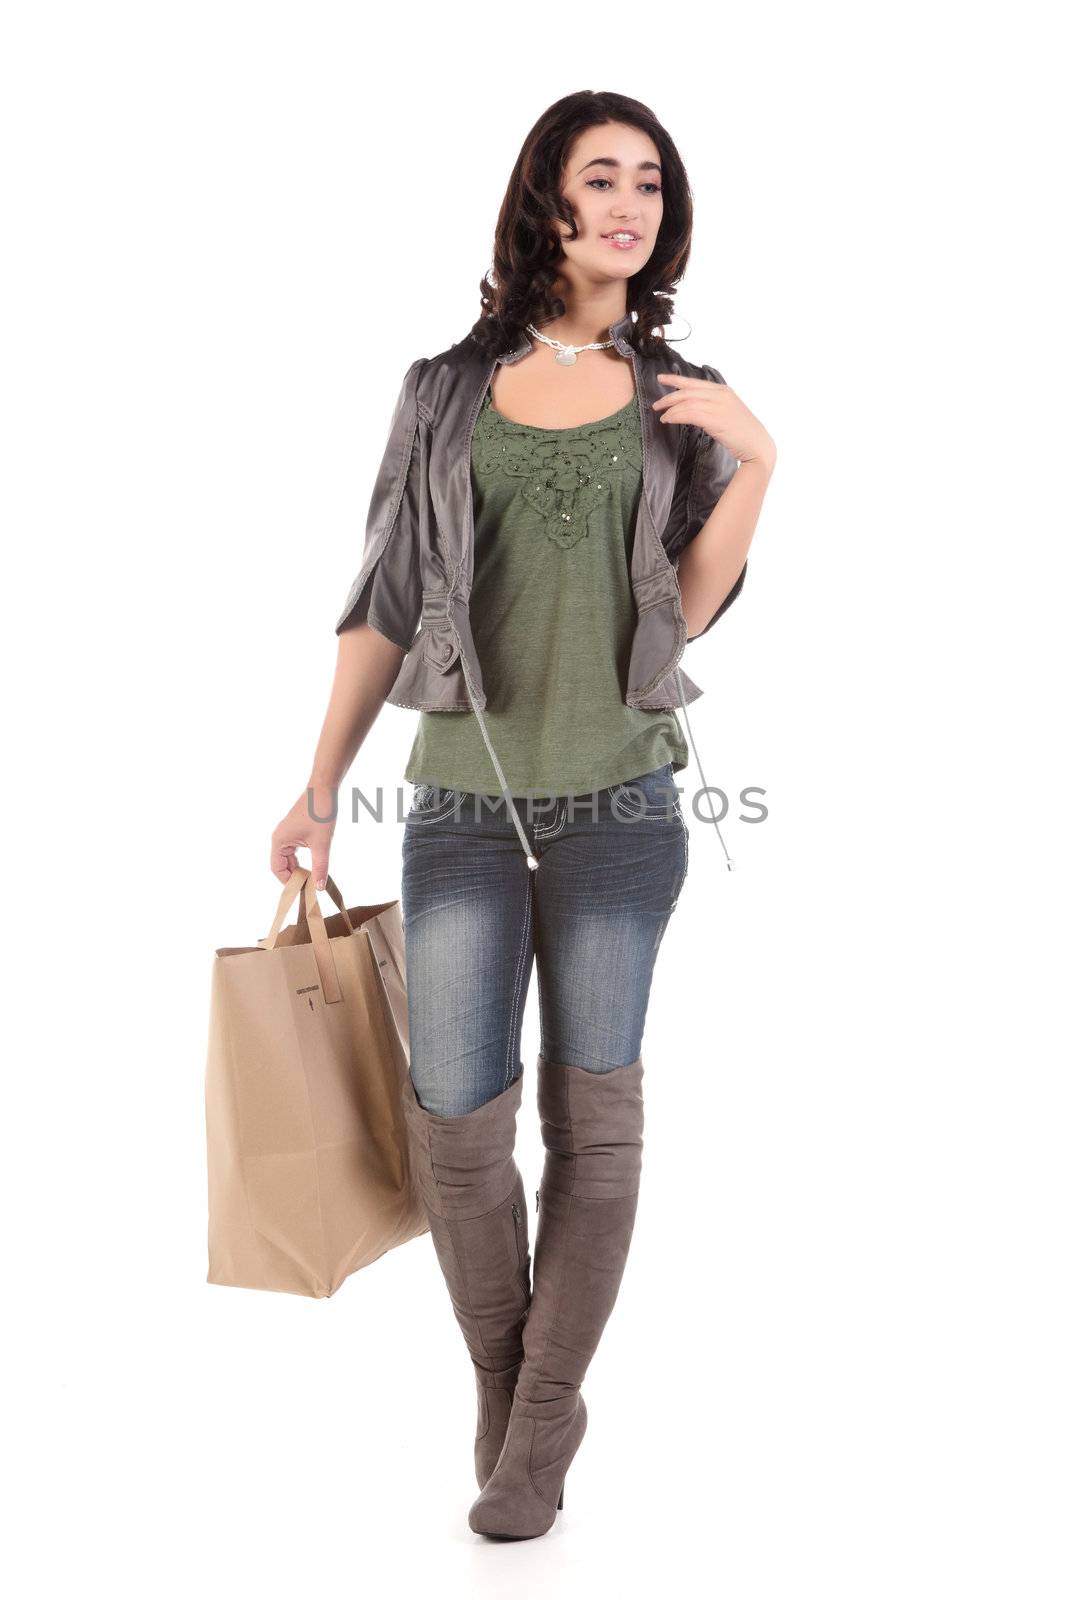 young woman with shopping by clearviewstock